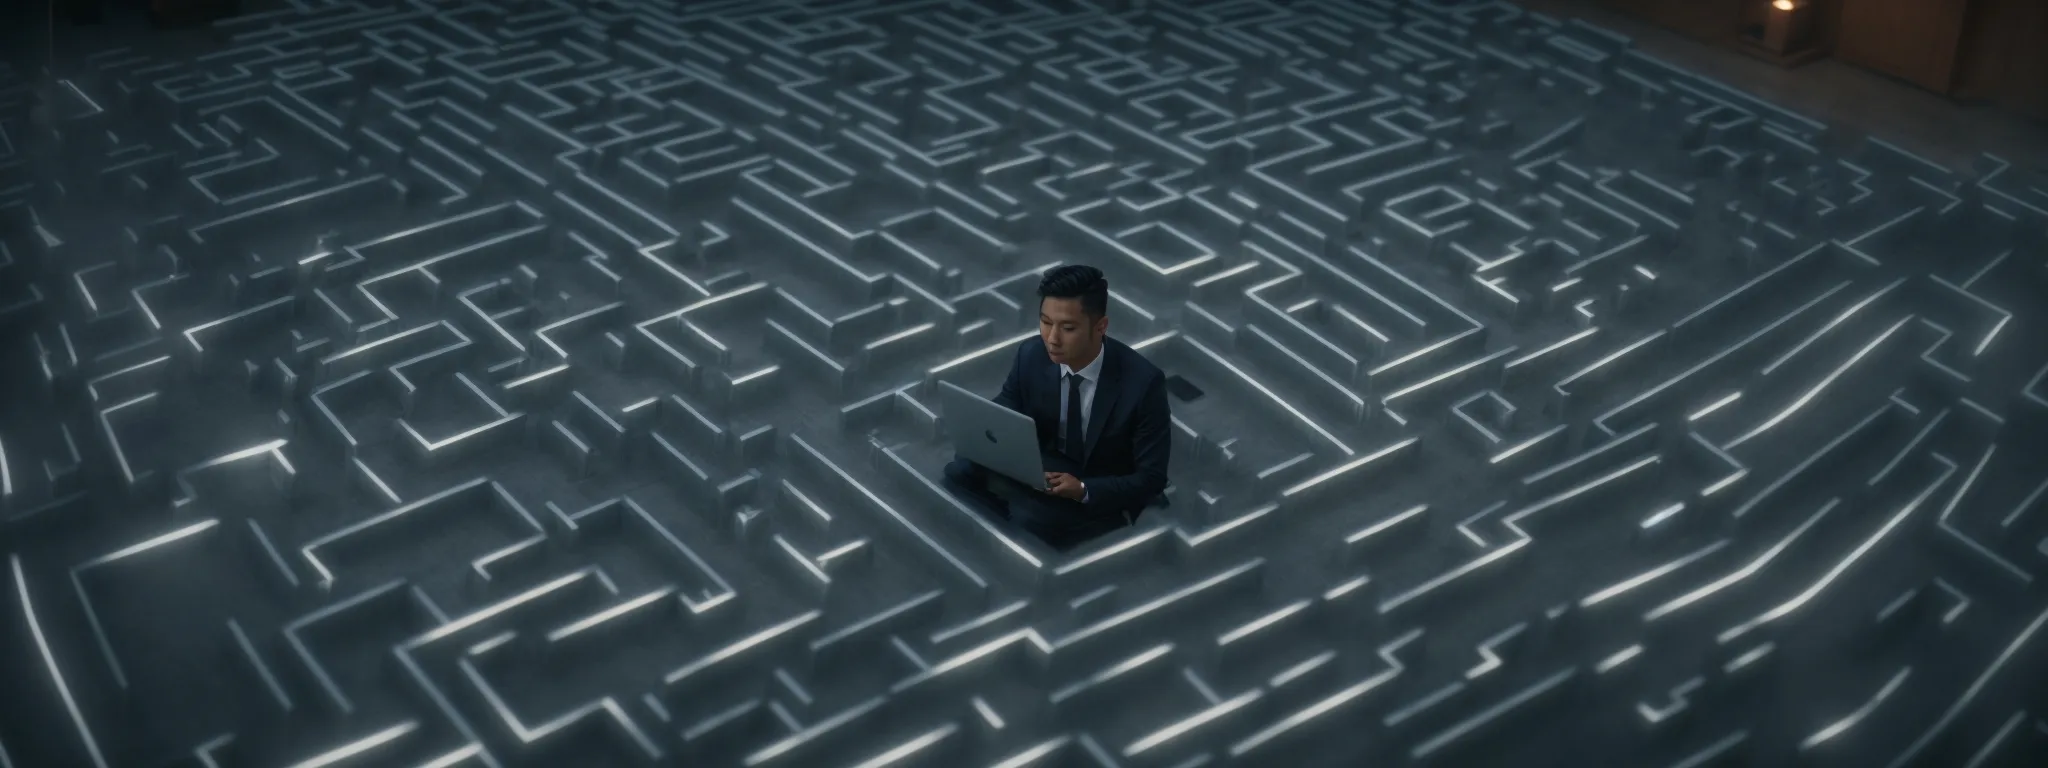 a marketer tracing a pathway through a maze on a computer screen to symbolize target optimization.